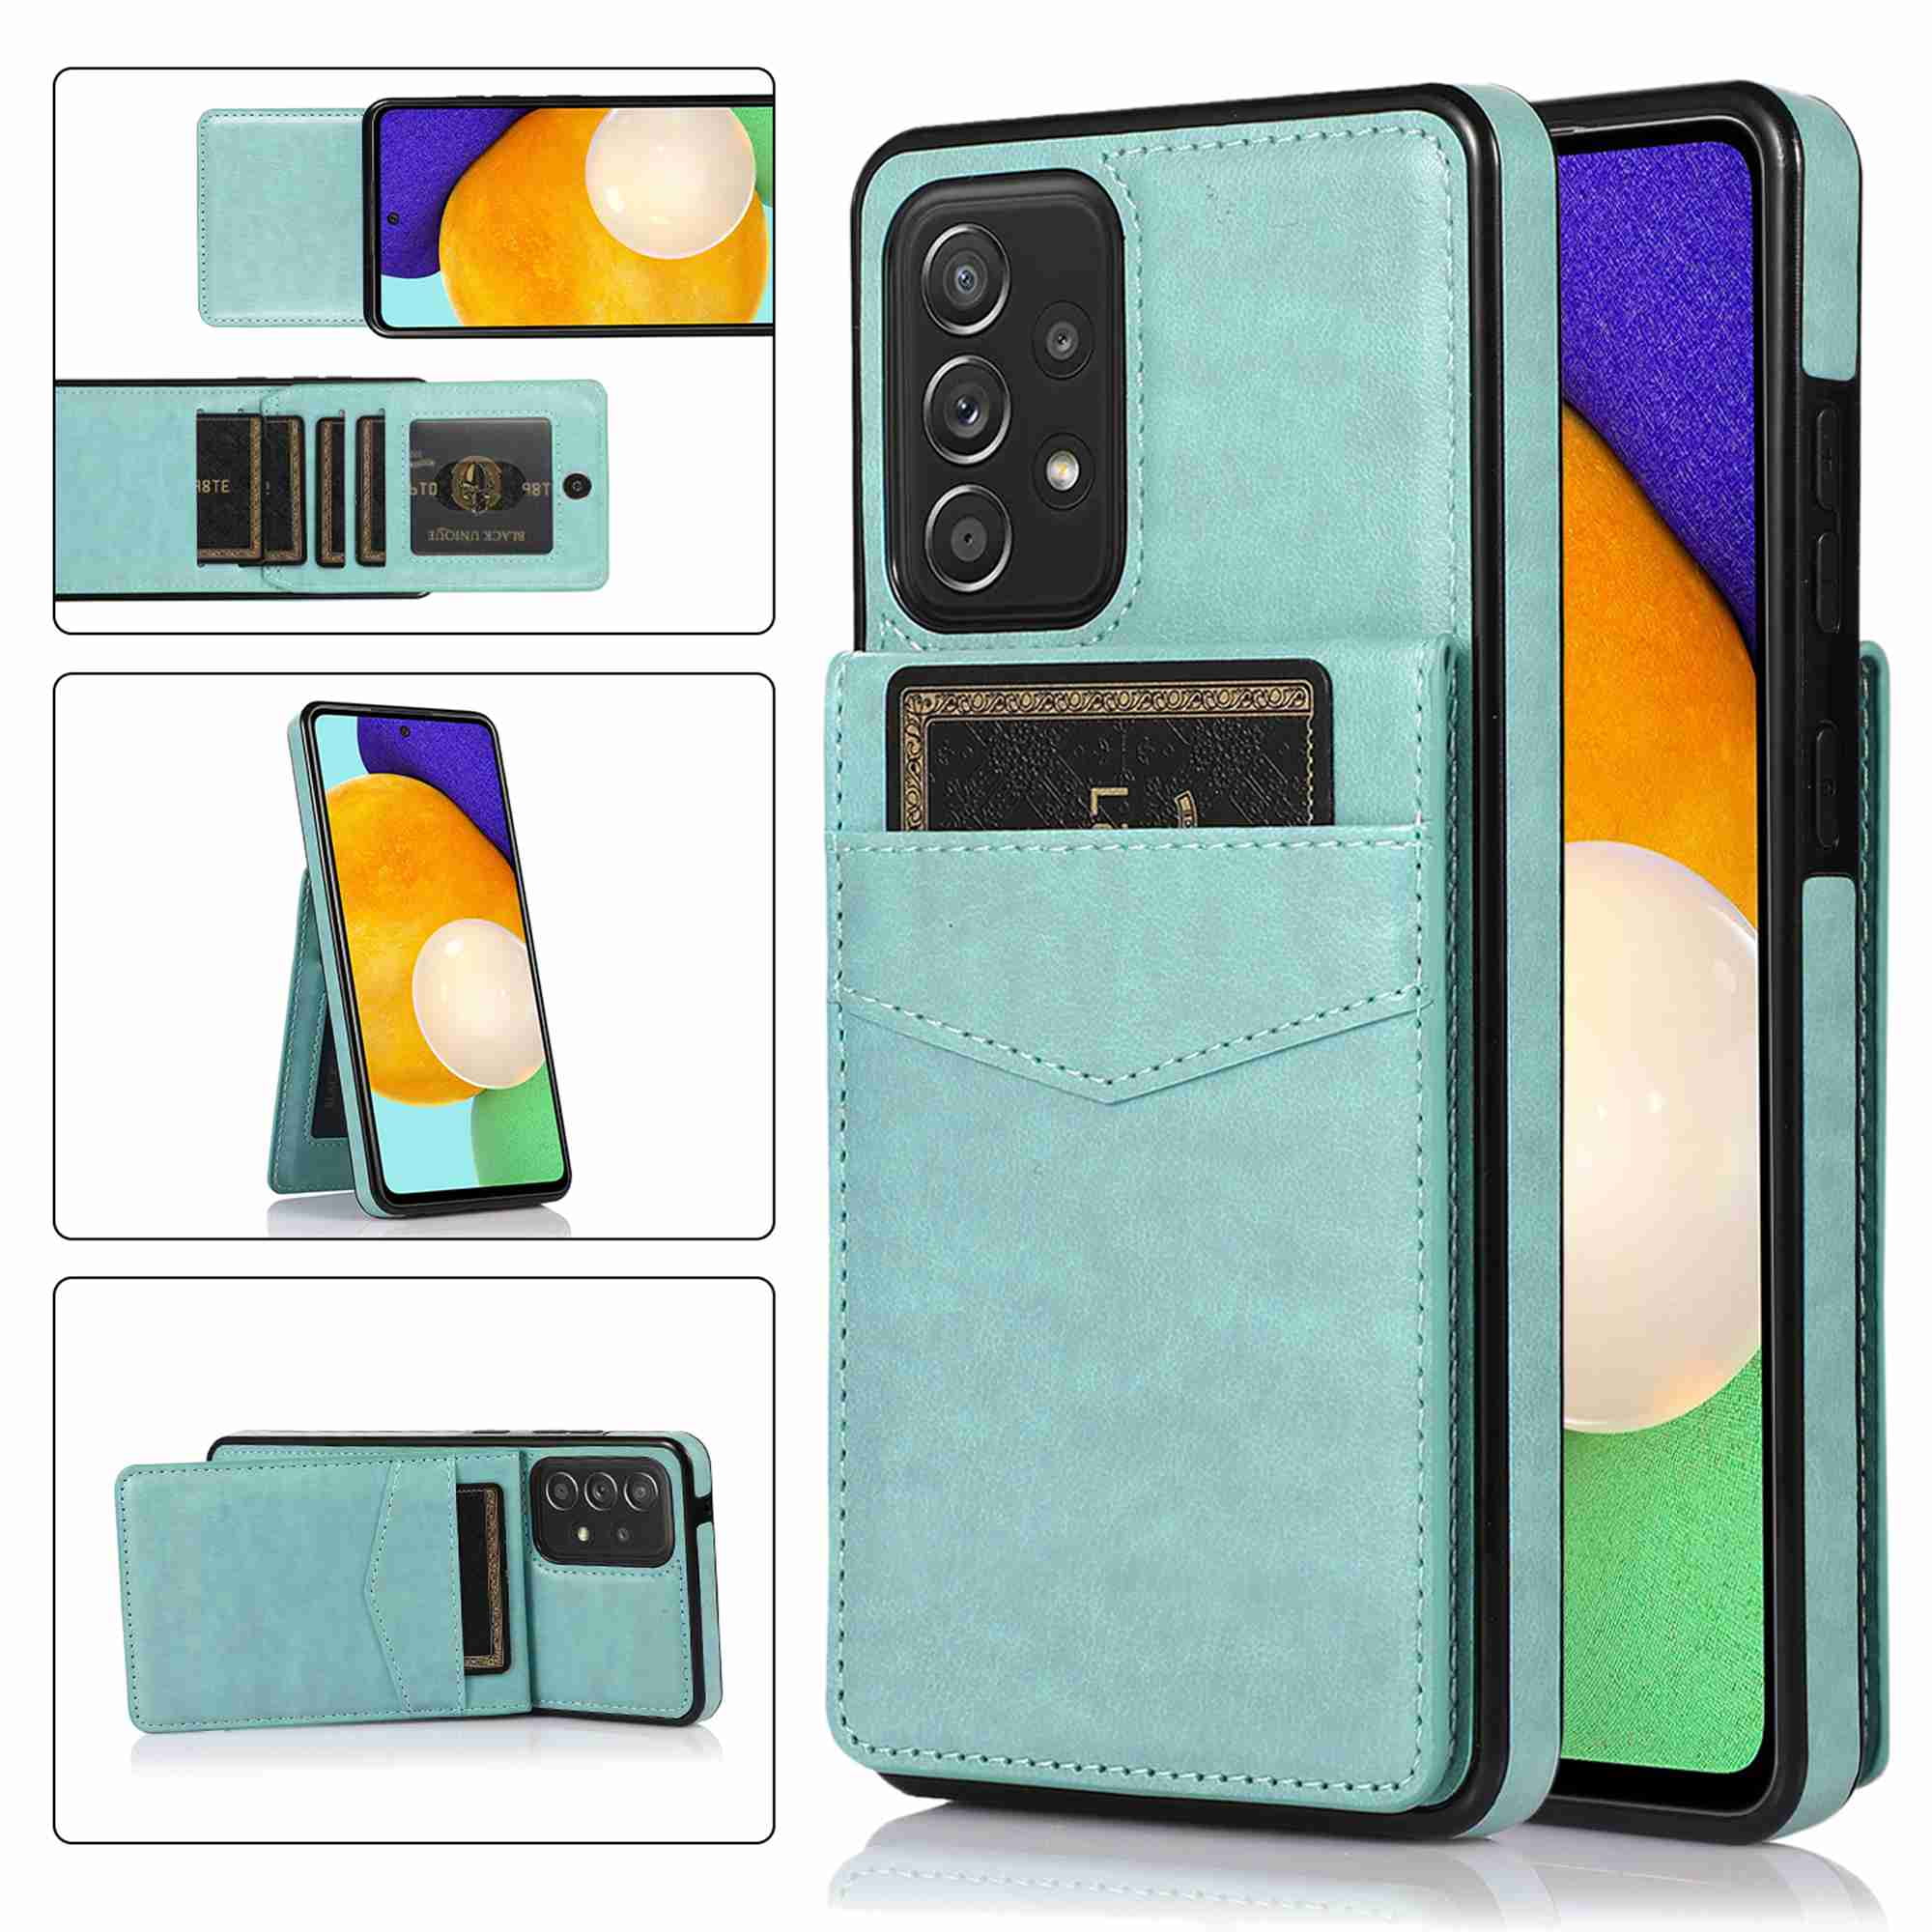 Black Samsung A52 5g Case Wallet,Glitter Zipper Leather Shockproof Protective Cover for Women with Card Holder Stand Flip Magnetic Phone Case for Samsung A52 5G